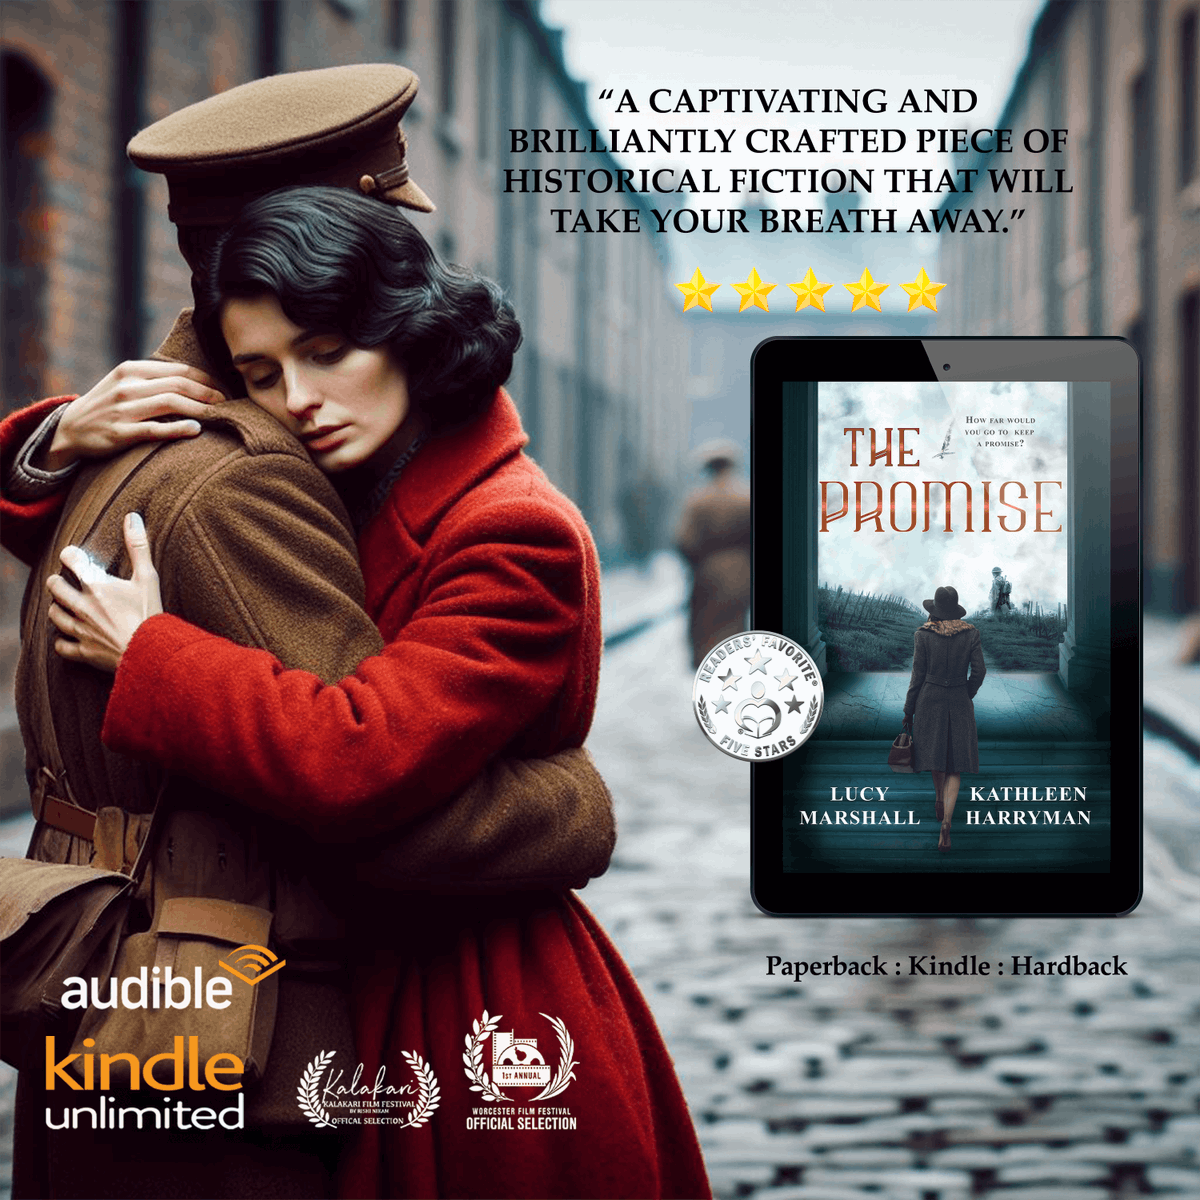 'A captivating and brilliantly crafted piece of historical fiction that will take your breath away! Absolutely recommend this well-developed and pull-at-your-heartstrings read. #KU #kindle #audible #paperback getbook.at/thepromise #Romance #HistoricalFiction #IARTG #Histfic